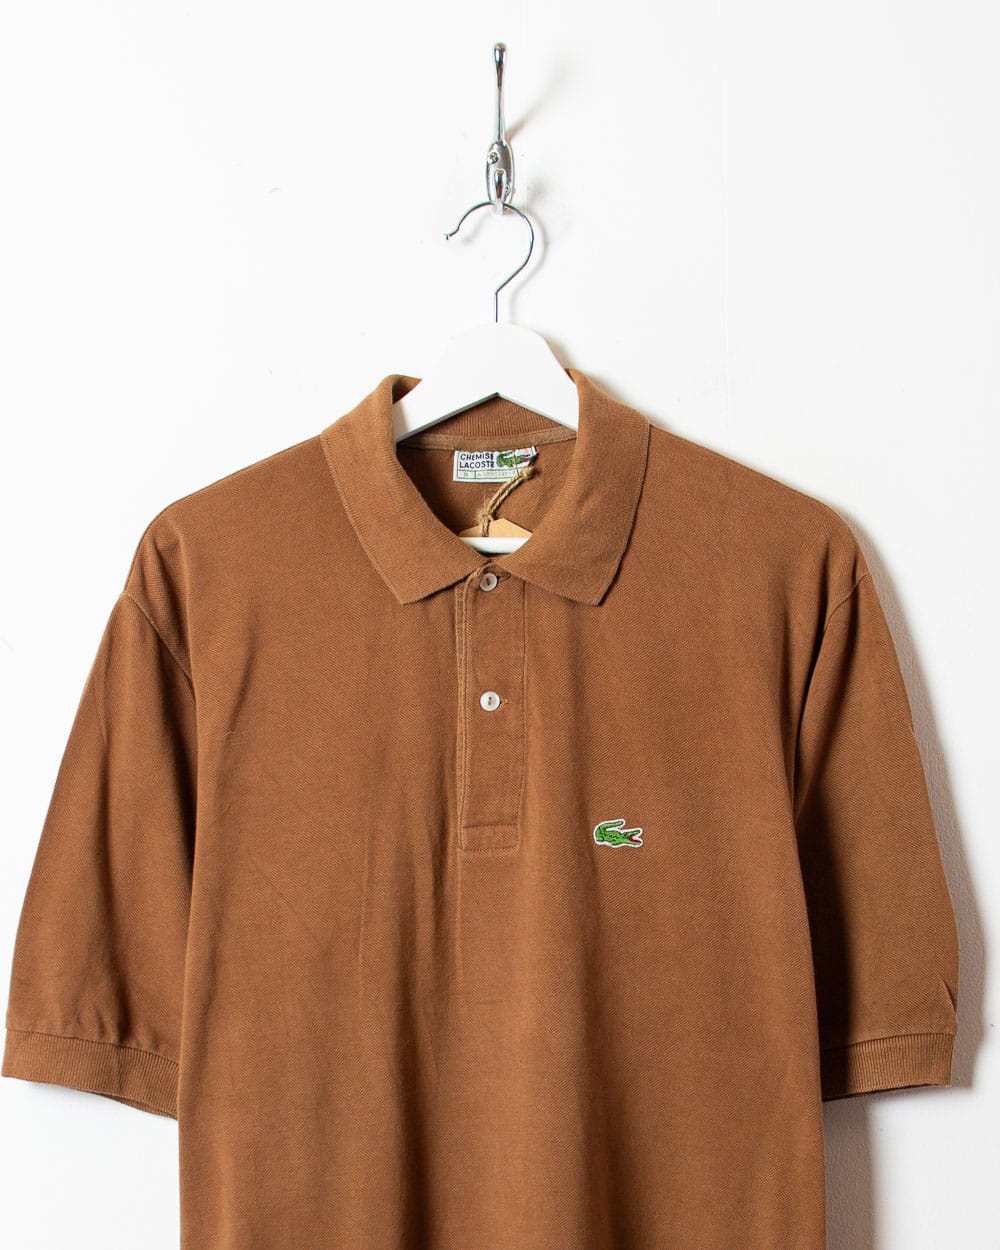 Brown Chemise Lacoste Polo Shirt - X-Large